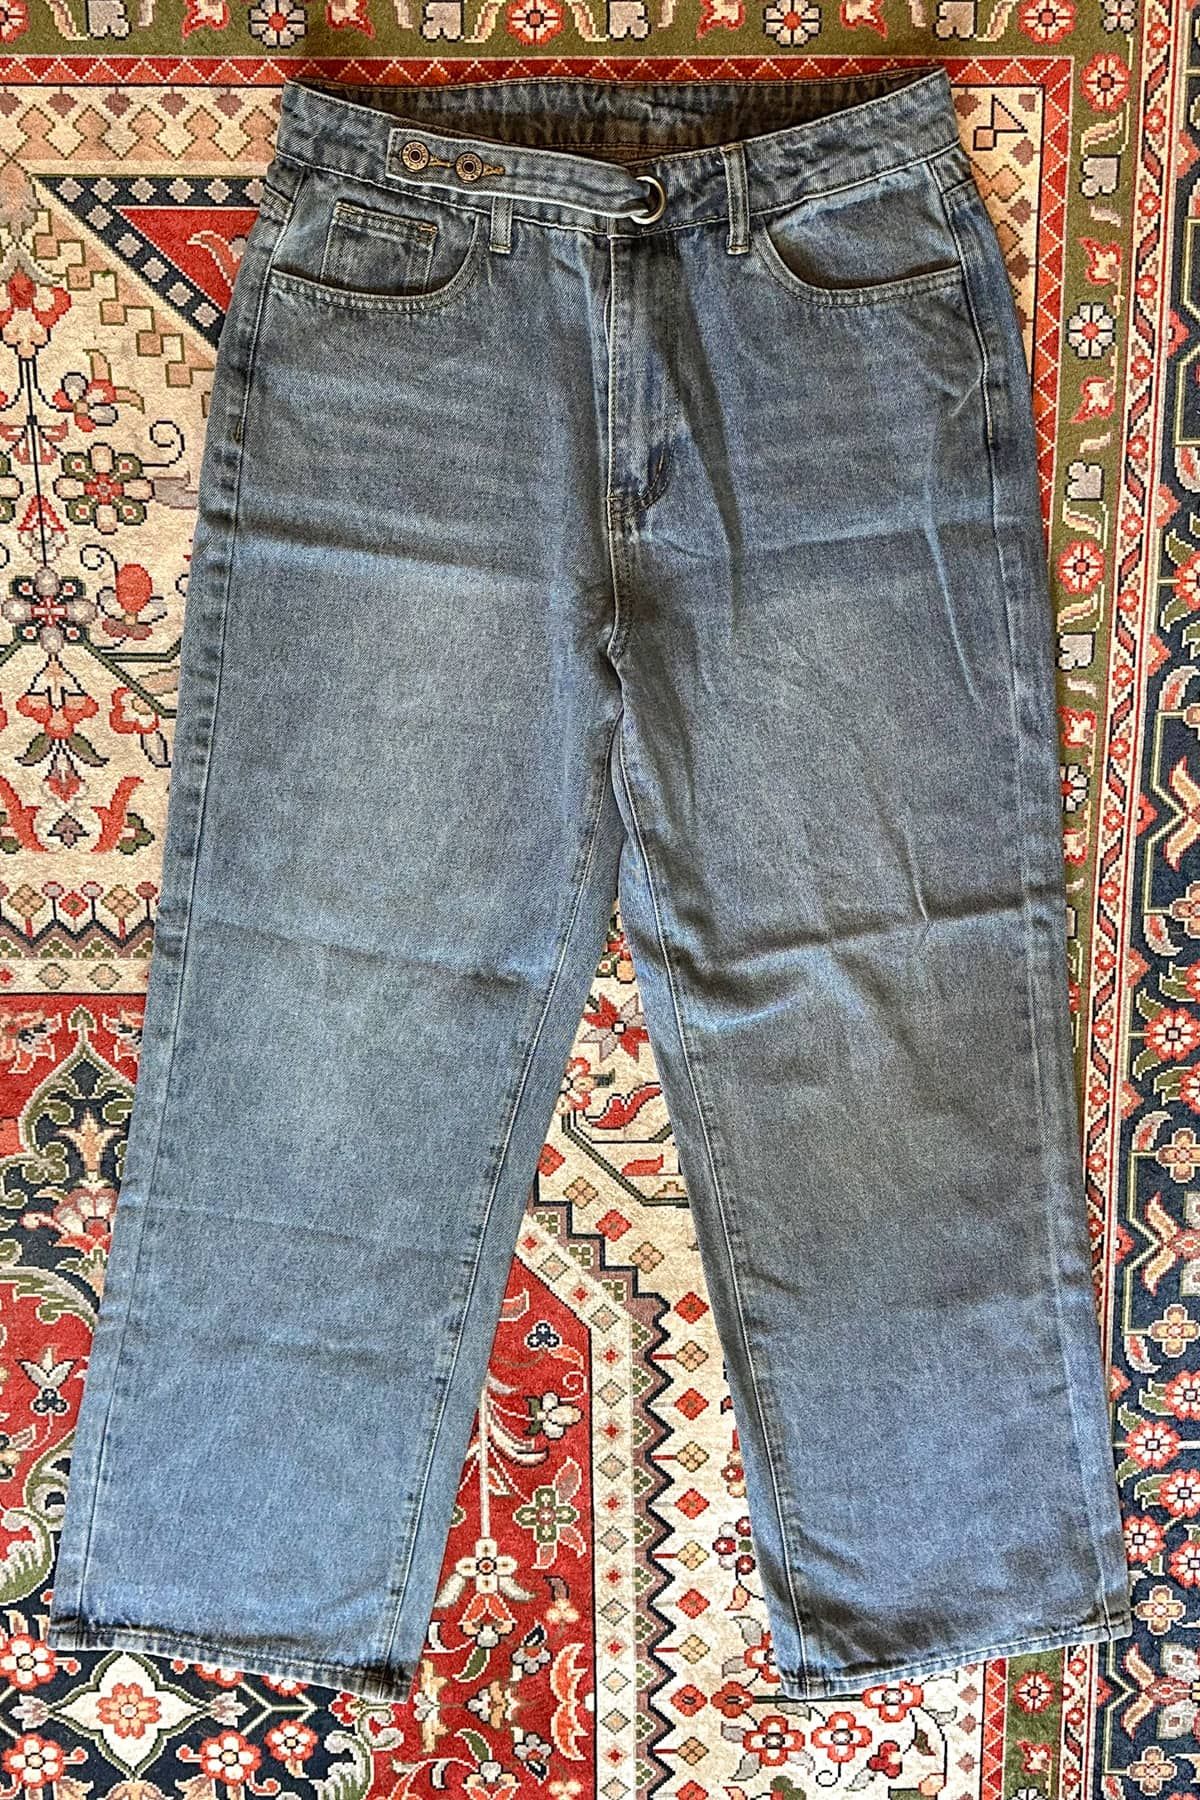 A pair of wide leg jeans lying flat on a red, white, and blue oriental rug.